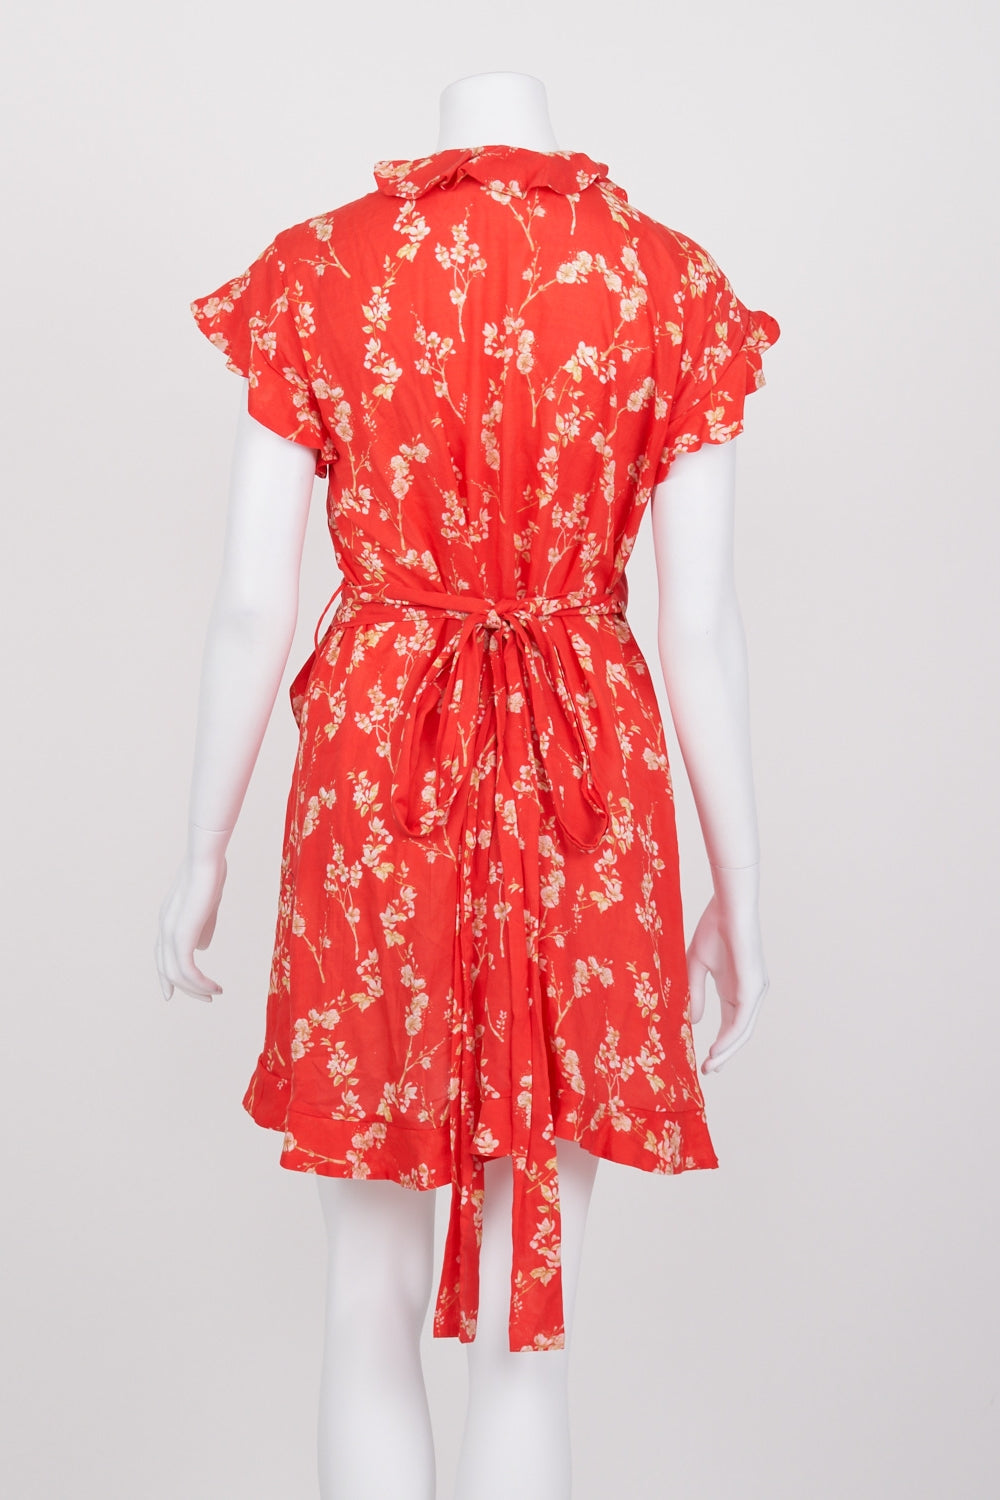 MLM Label Red Floral Wrap Dress S